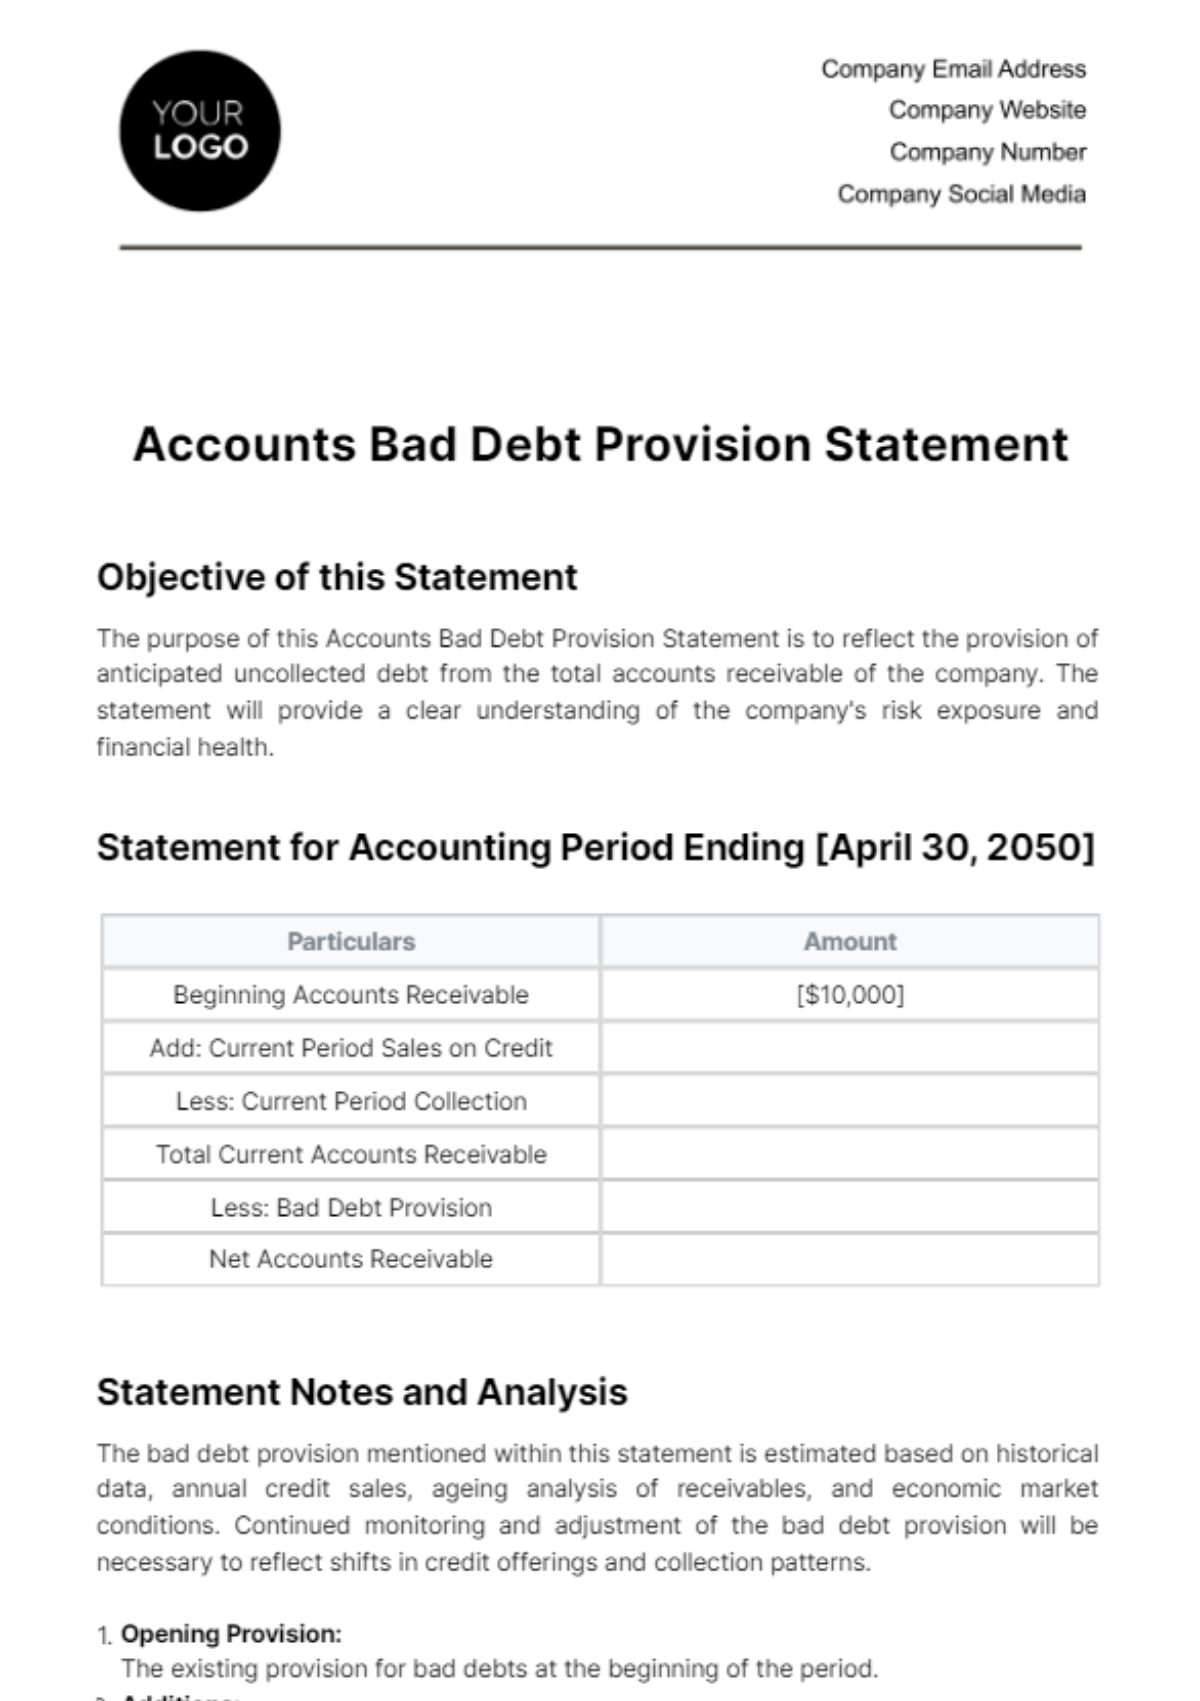 Accounts Bad Debt Provision Statement Template